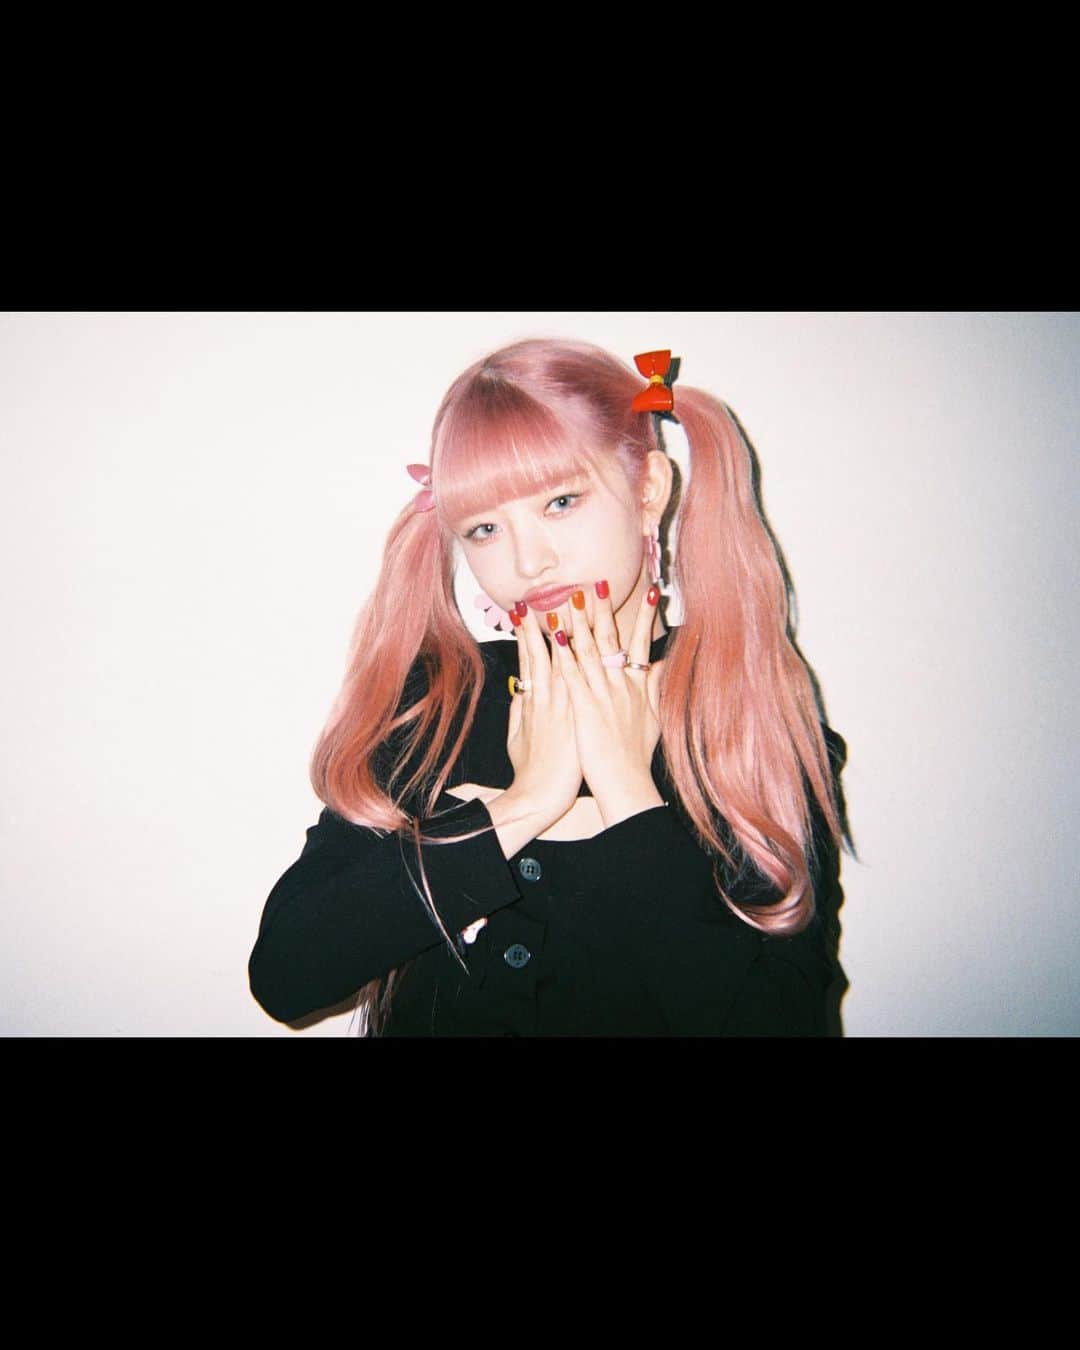 IVEのインスタグラム：「📸 HAPPY IVE DAY  <I've IVE>  BEHIND FILM 🎞  REI  #IVE #아이브 #アイヴ #REI #레이 #レイ #HappyIVEday #IVE_2nd_Anniversary #우리의_DECEMBER_영원히_EVER ⭐」